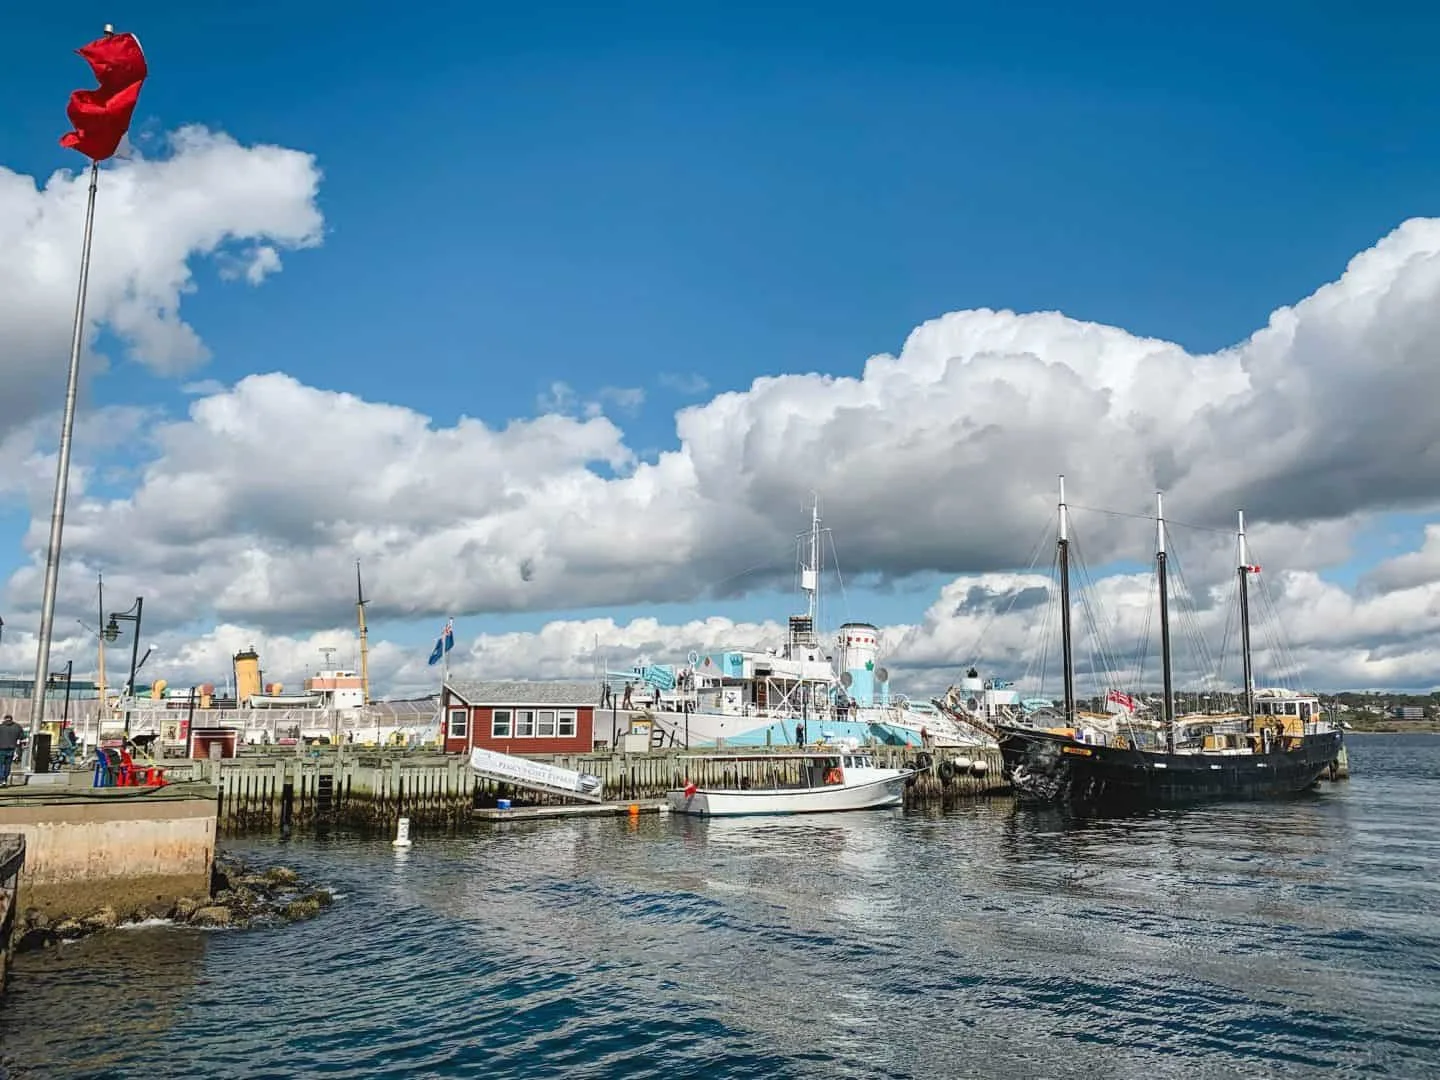 The best things to see and do in and around Halifax, Nova Scotia. Here's how to spend your first trip in Nova Scotia, Canada!